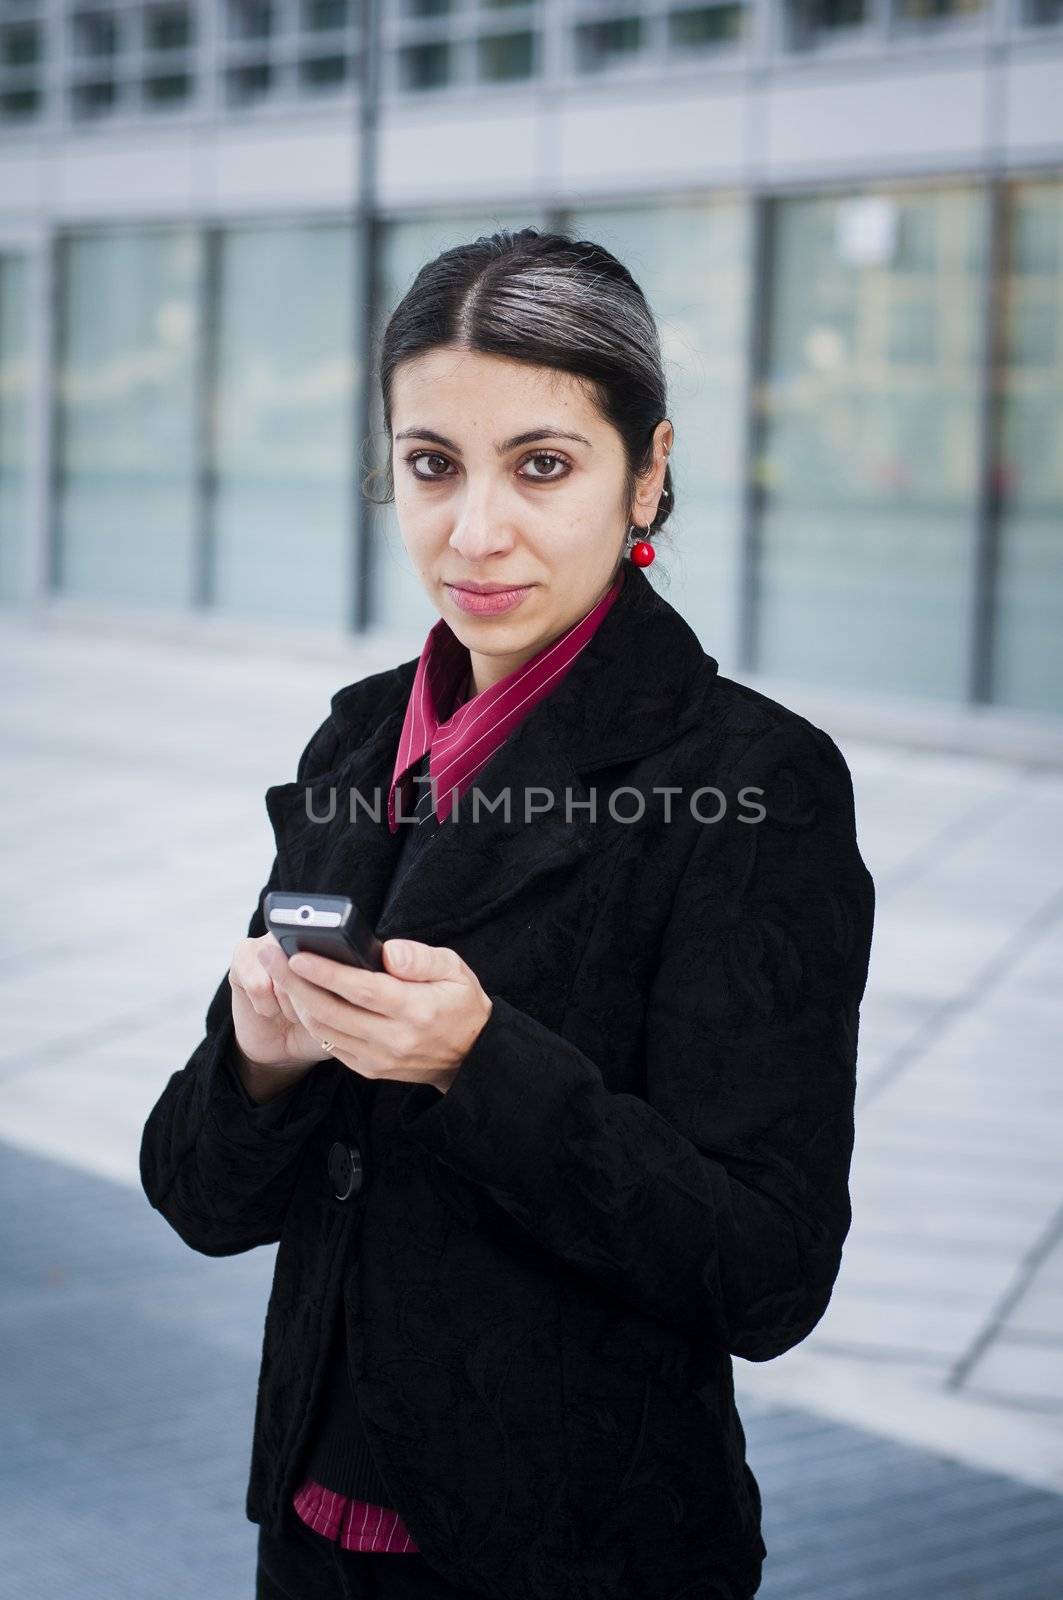 business girl on the phone in front of a modern building